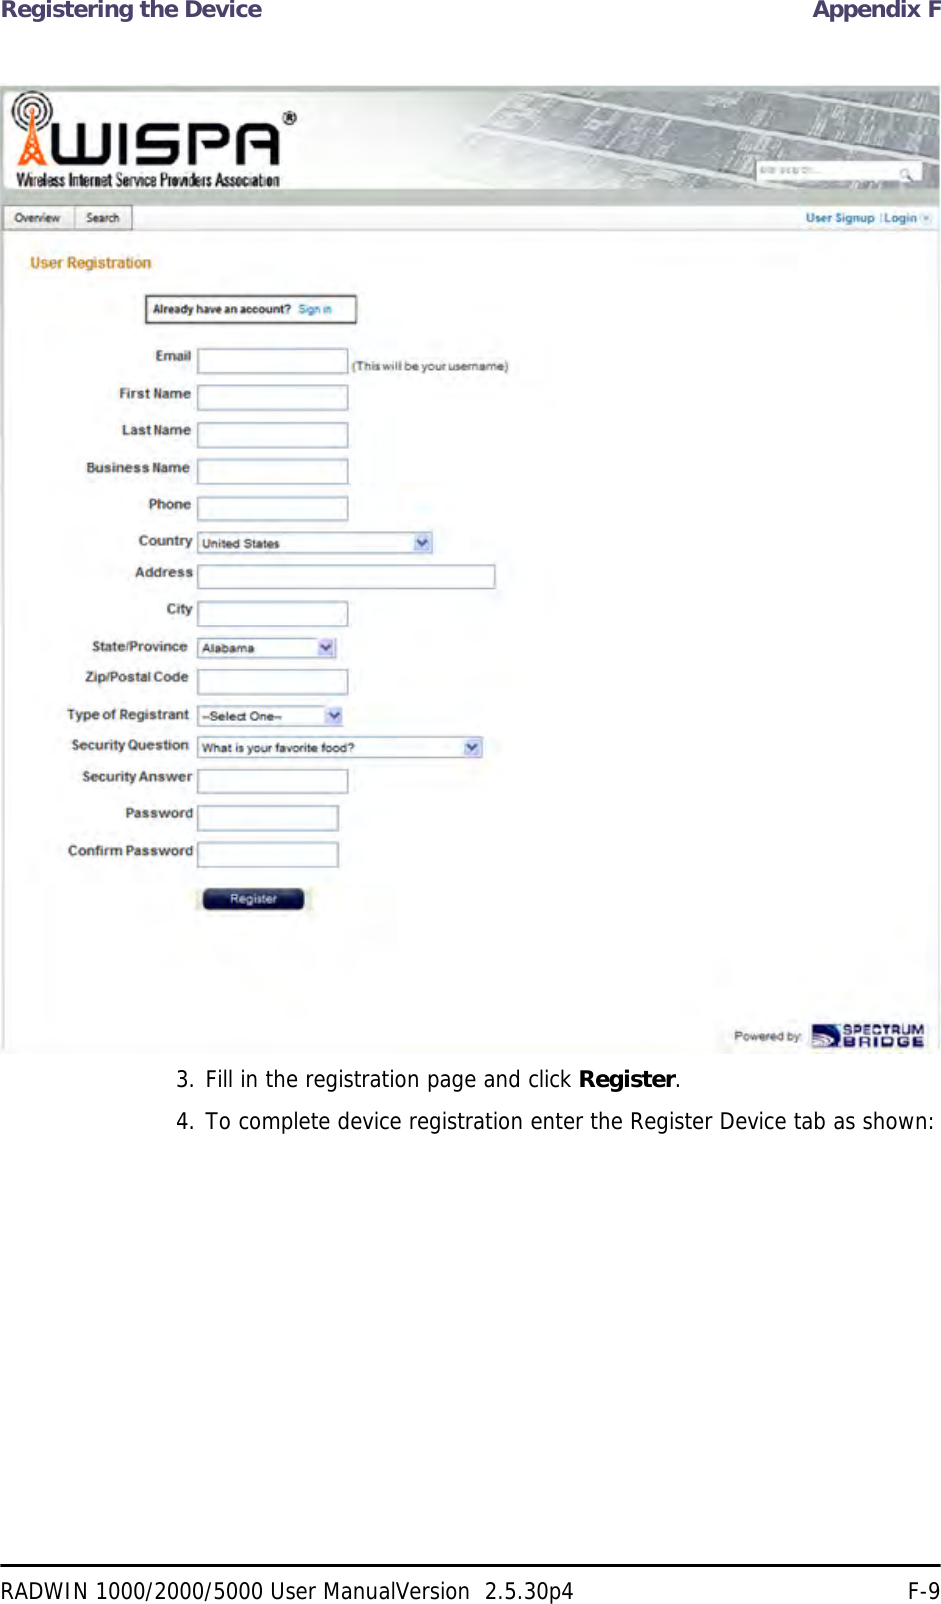 Registering the Device Appendix FRADWIN 1000/2000/5000 User ManualVersion  2.5.30p4 F-93. Fill in the registration page and click Register.4. To complete device registration enter the Register Device tab as shown: